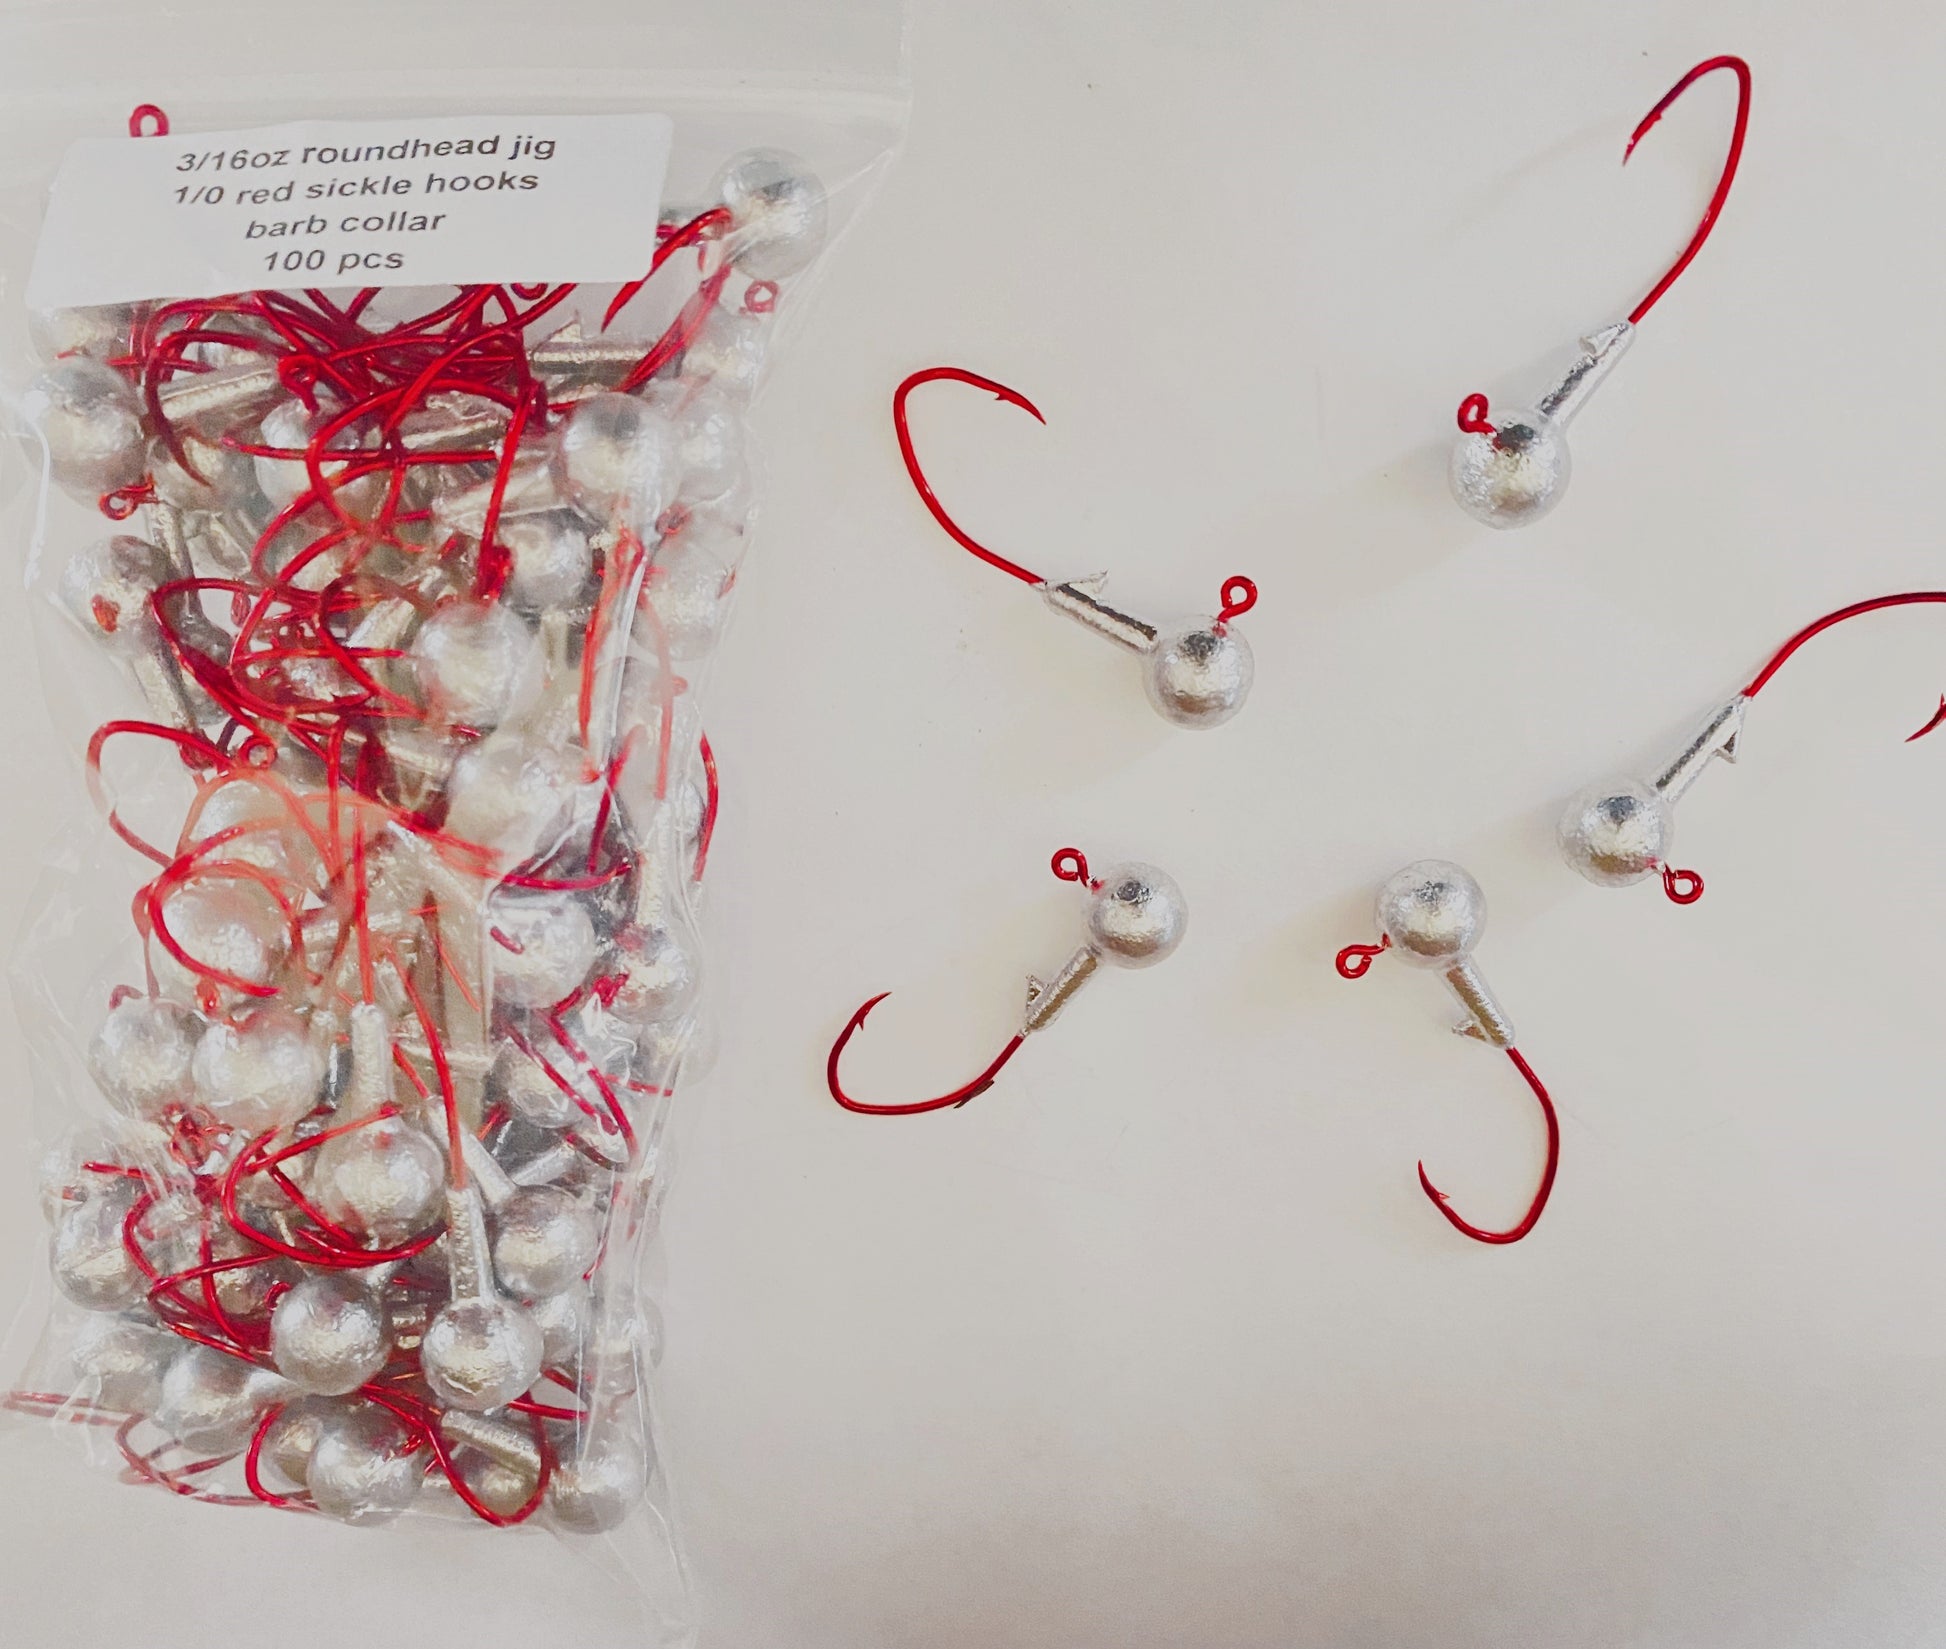 3/16 oz round head barbed collar jigs with 1/0 red sickle hook 100 pcs – M  & C's Handcrafted Jigs & Lures